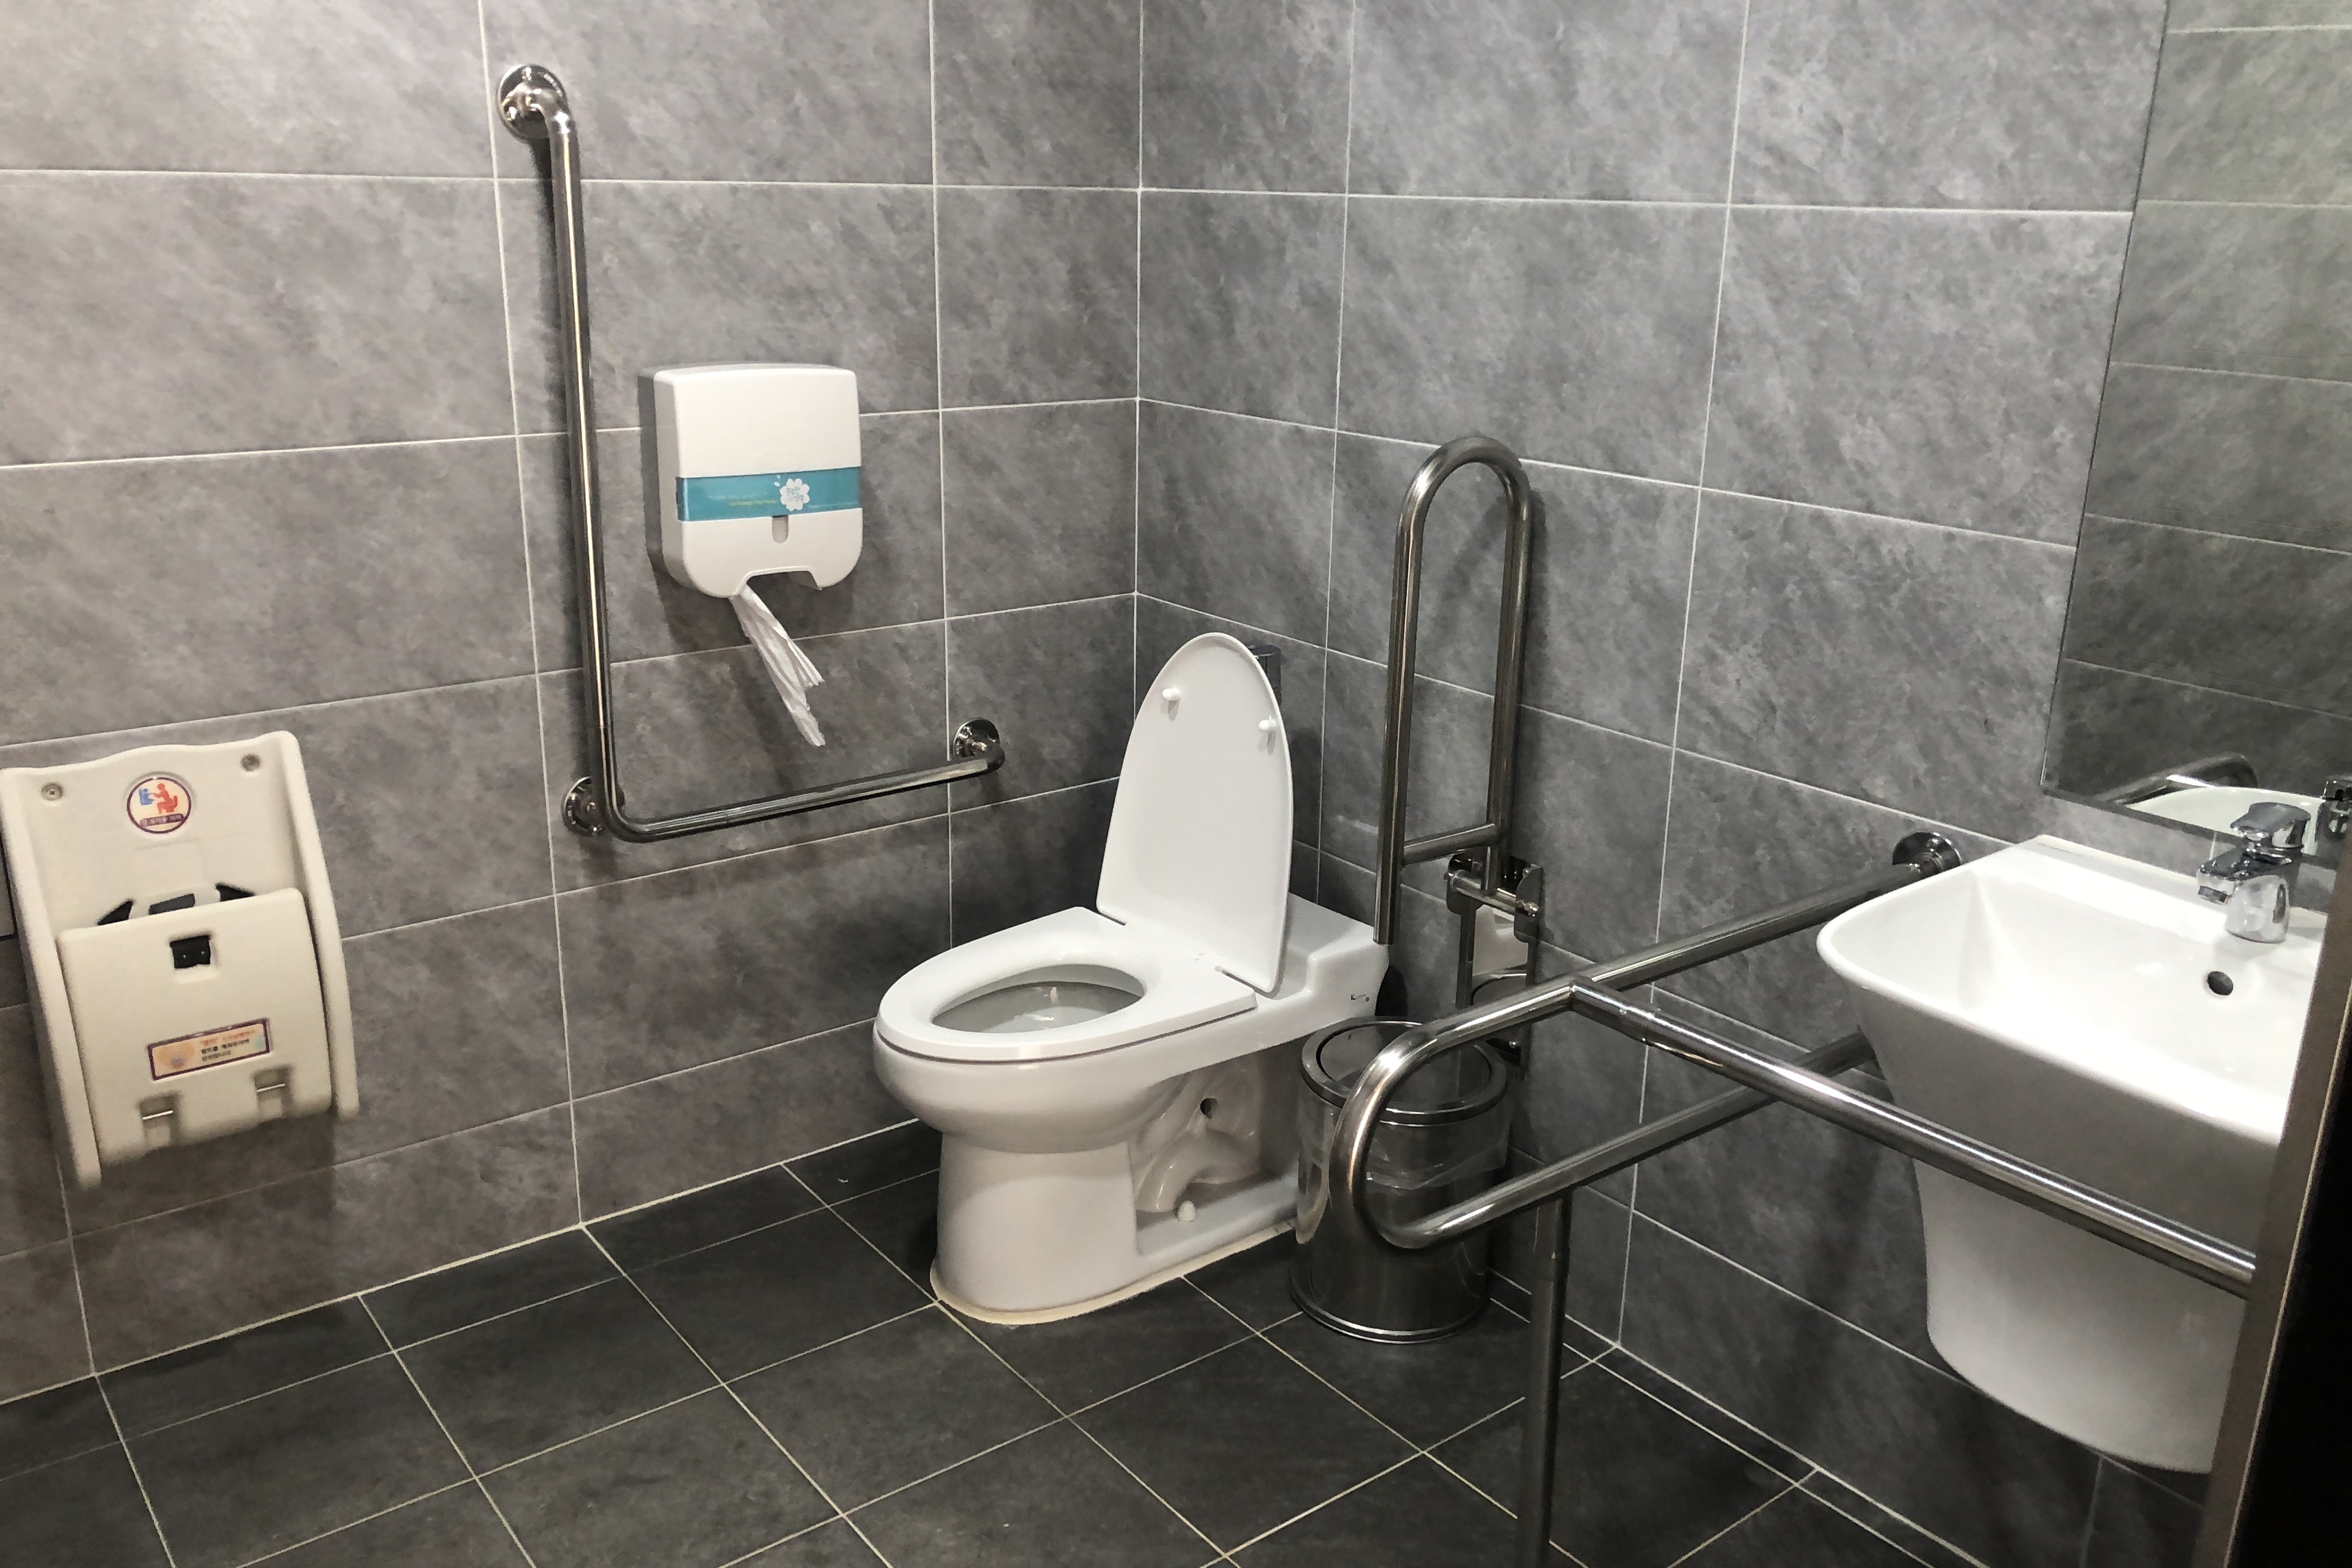 Accessible restroom for persons with disabilities0 : Accessible restroom with grab bars
